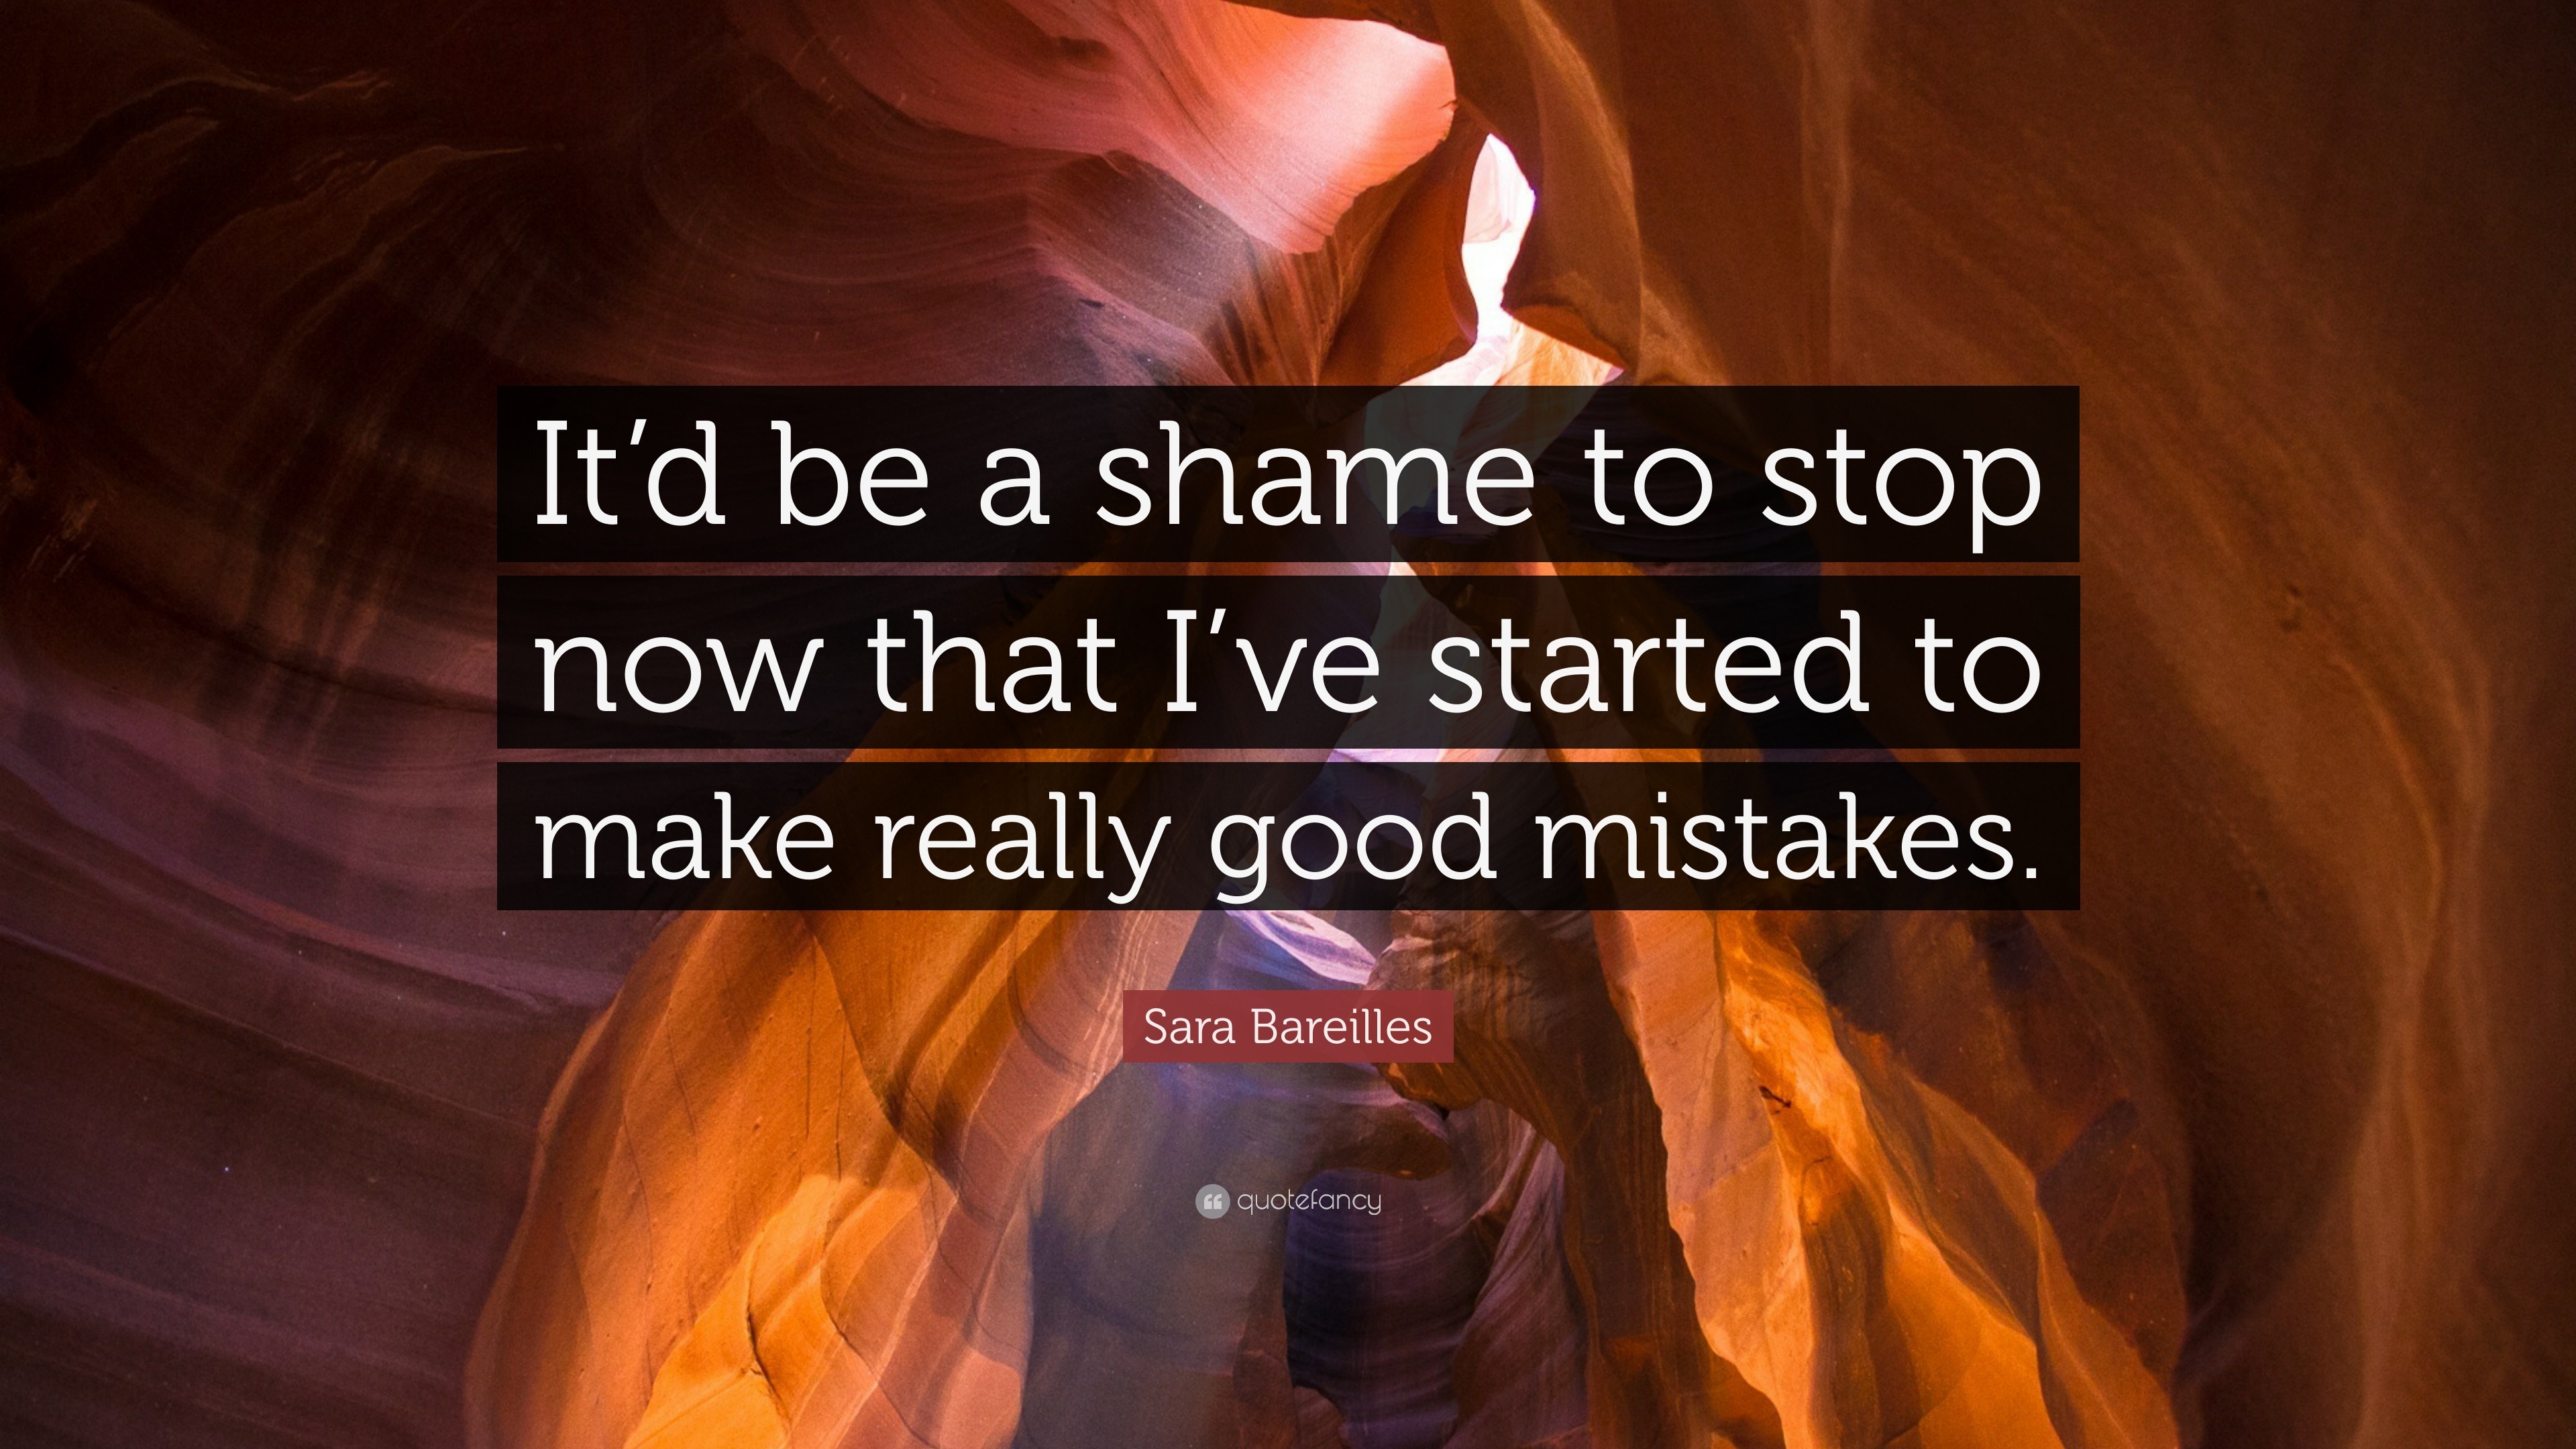 Sara Bareilles Quote: "It'd be a shame to stop now that I've started to make really good mistakes."